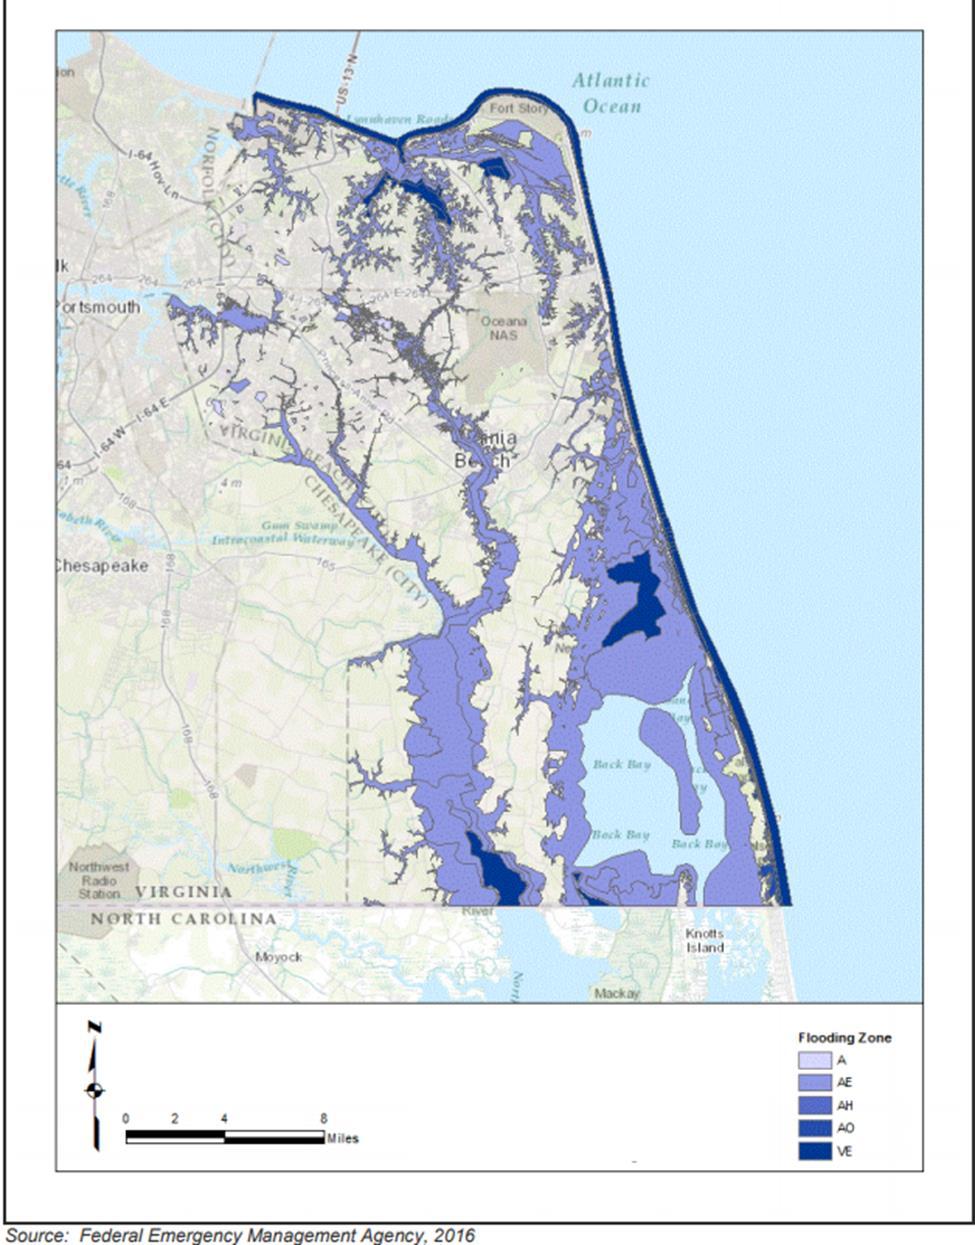 Figure 1, City of Virginia Beach 100-Year Floodplain While one could theoretically observe which roads fall within the 100-year flood plain, this analysis fails to factor vertical heterogeneity- that